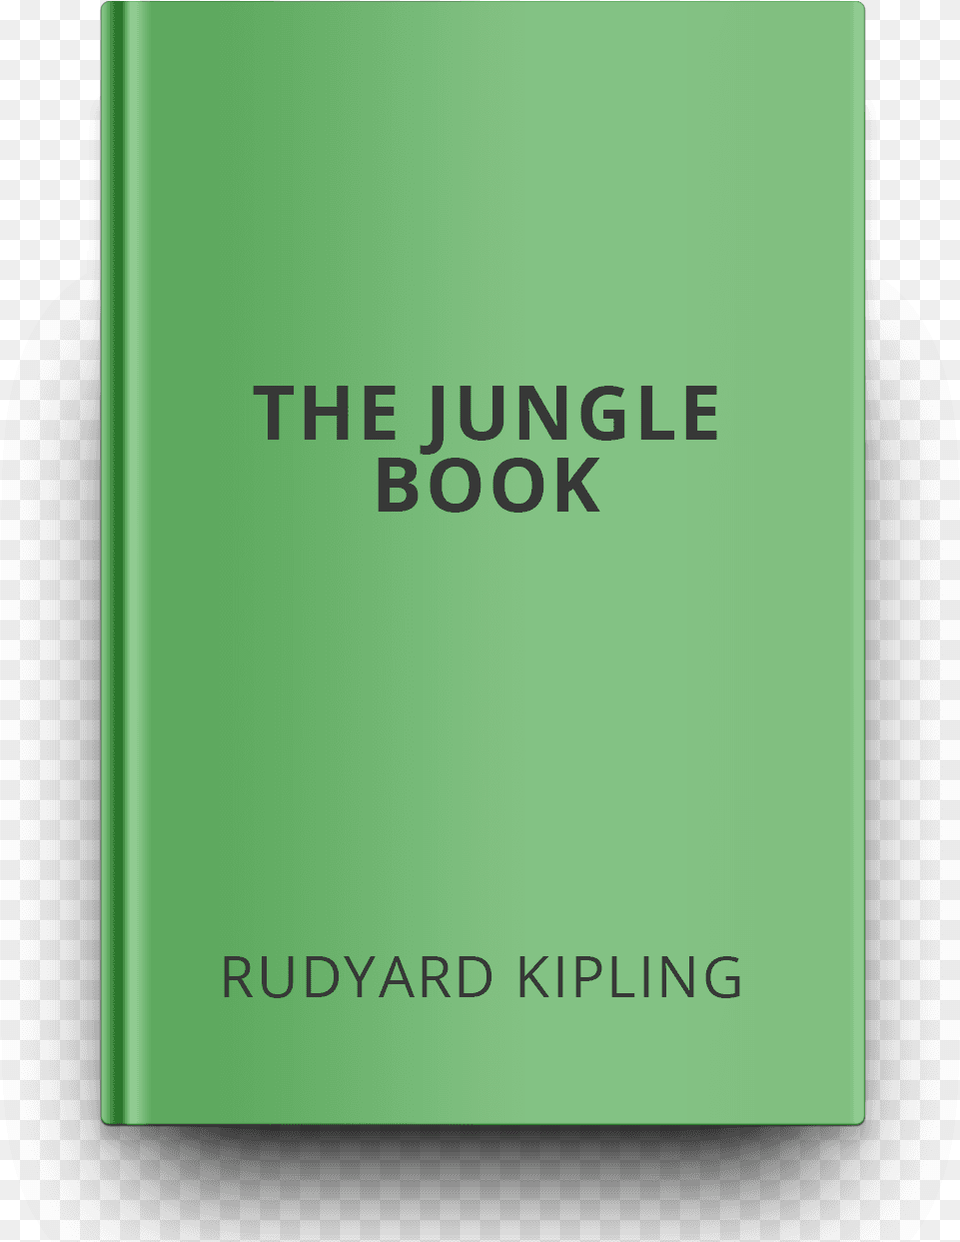 The Jungle Book Book Cover, Publication, Text, Bottle Png Image